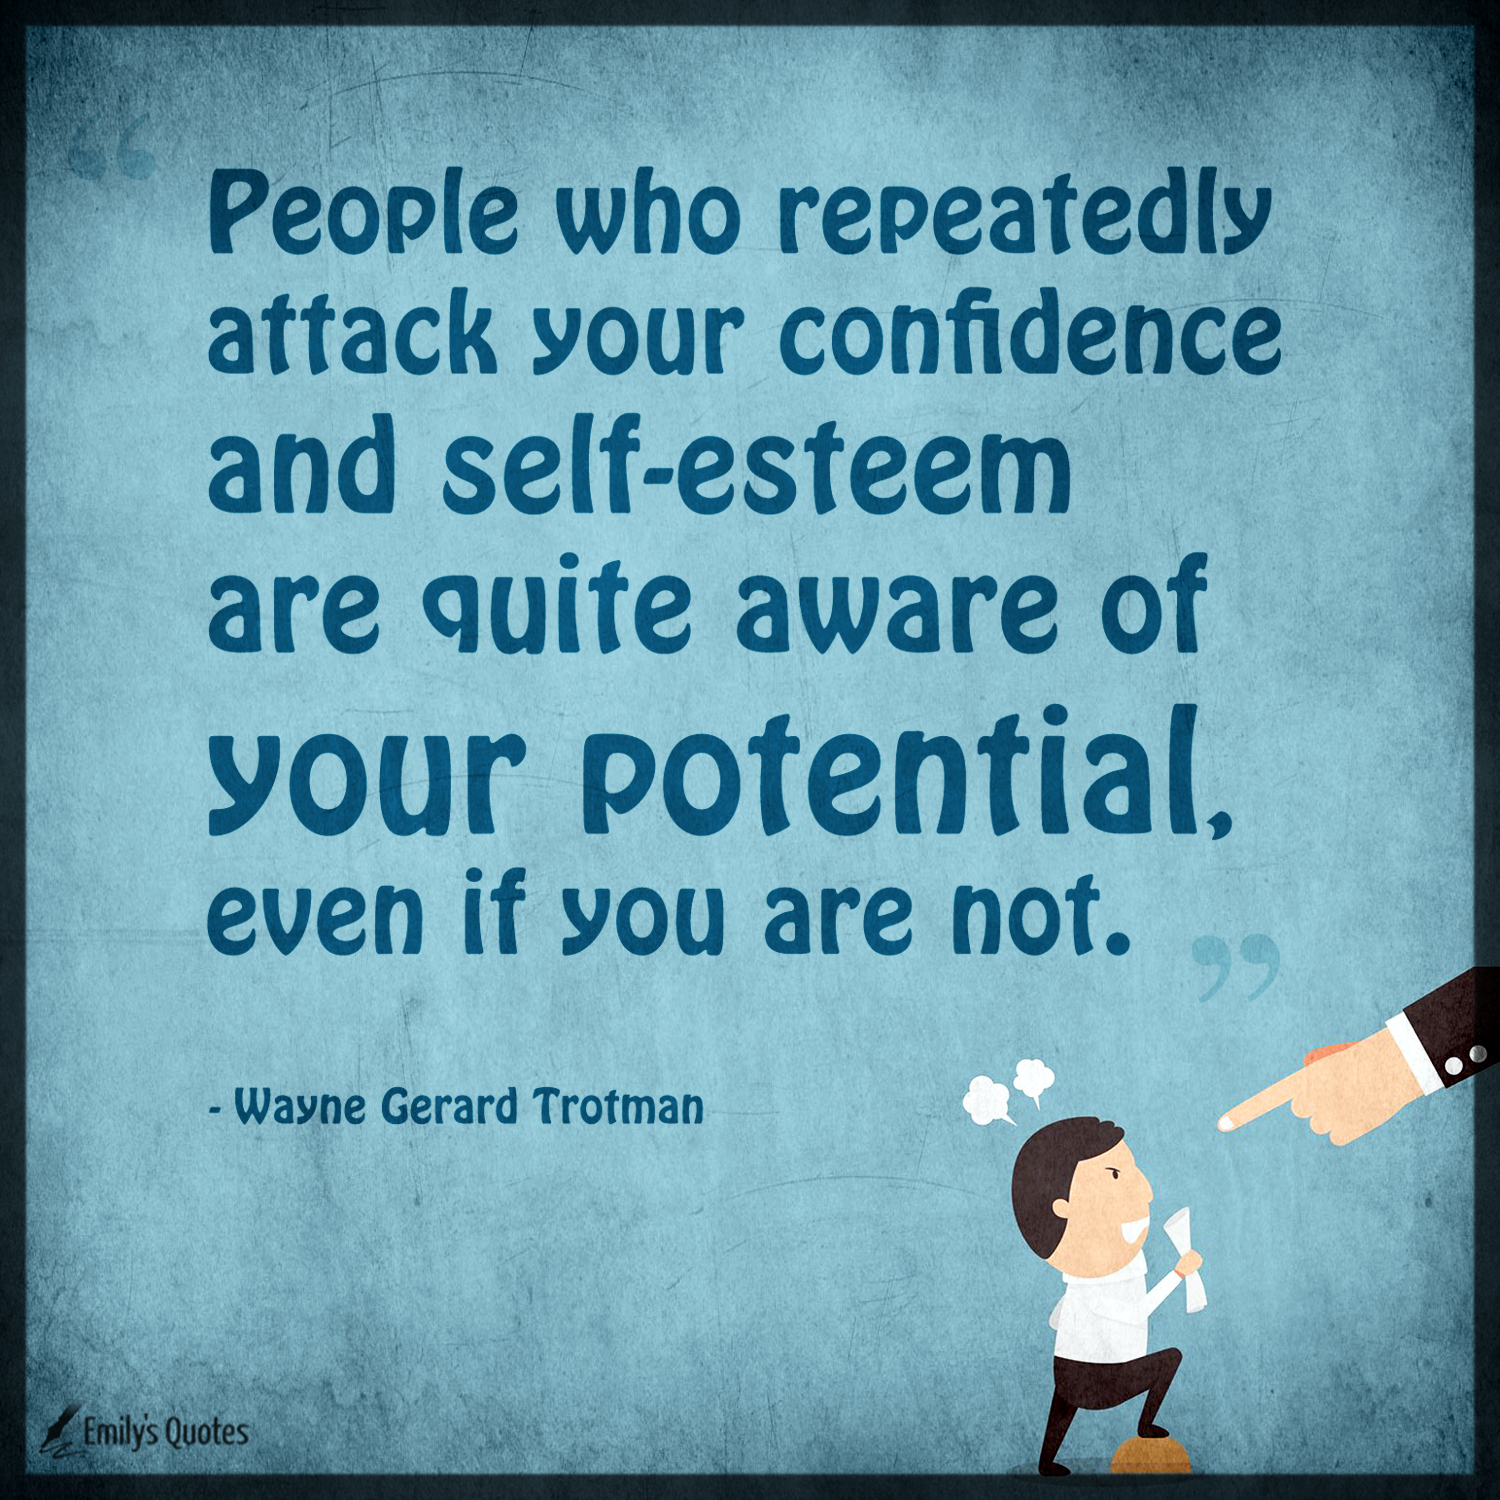 People who repeatedly attack your confidence and self-esteem are quite aware of your potential